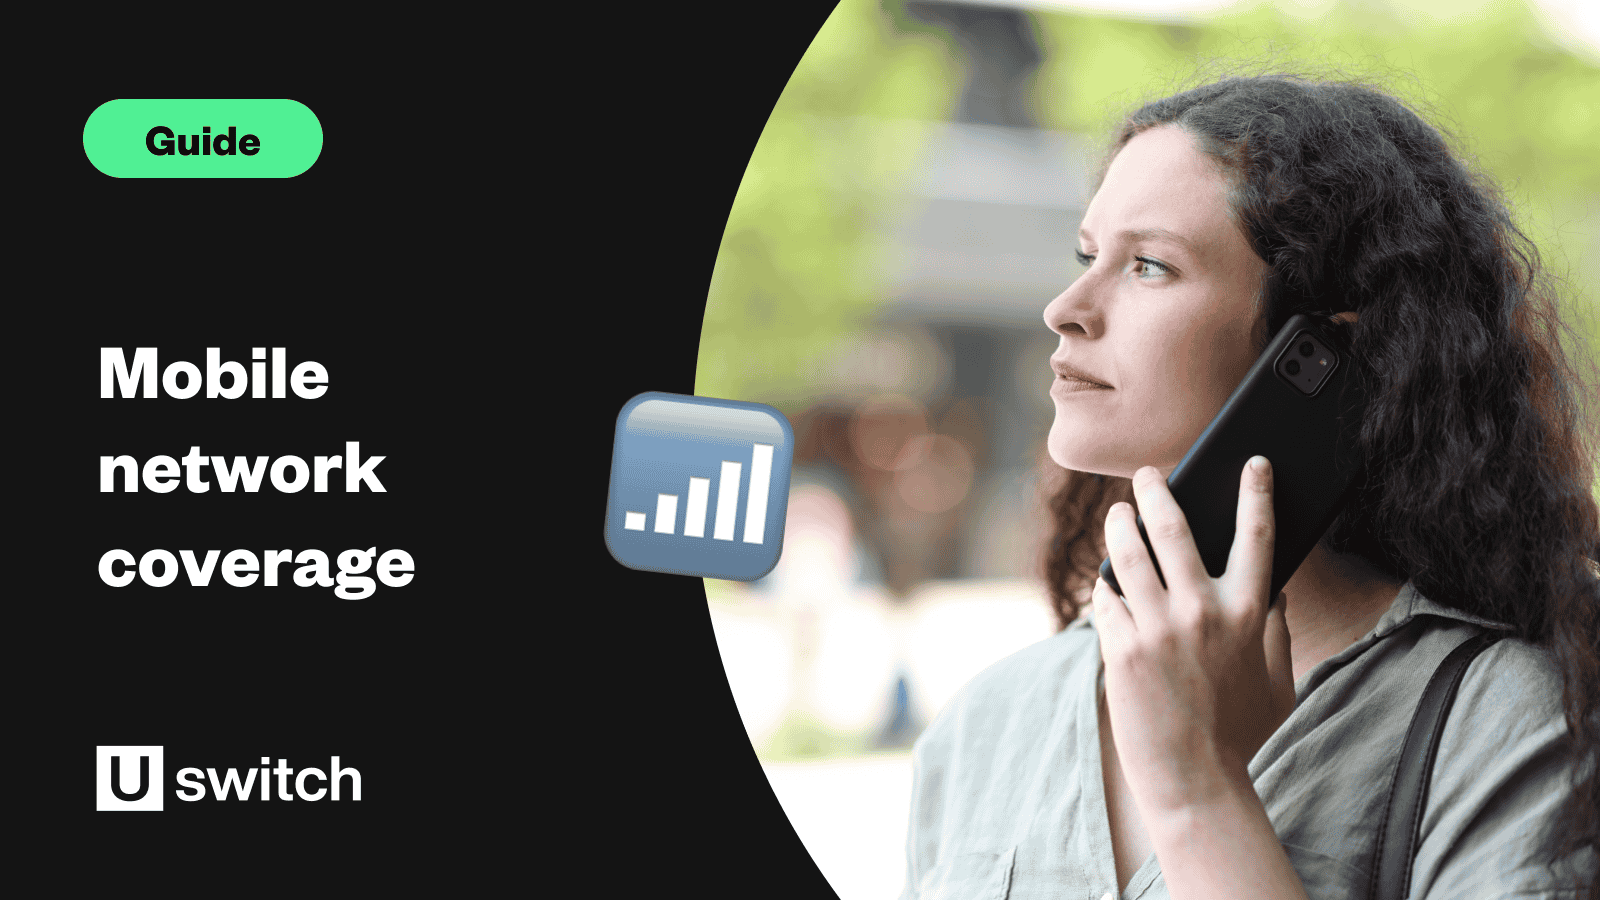 Mobile network coverage guide - woman on mobile phone